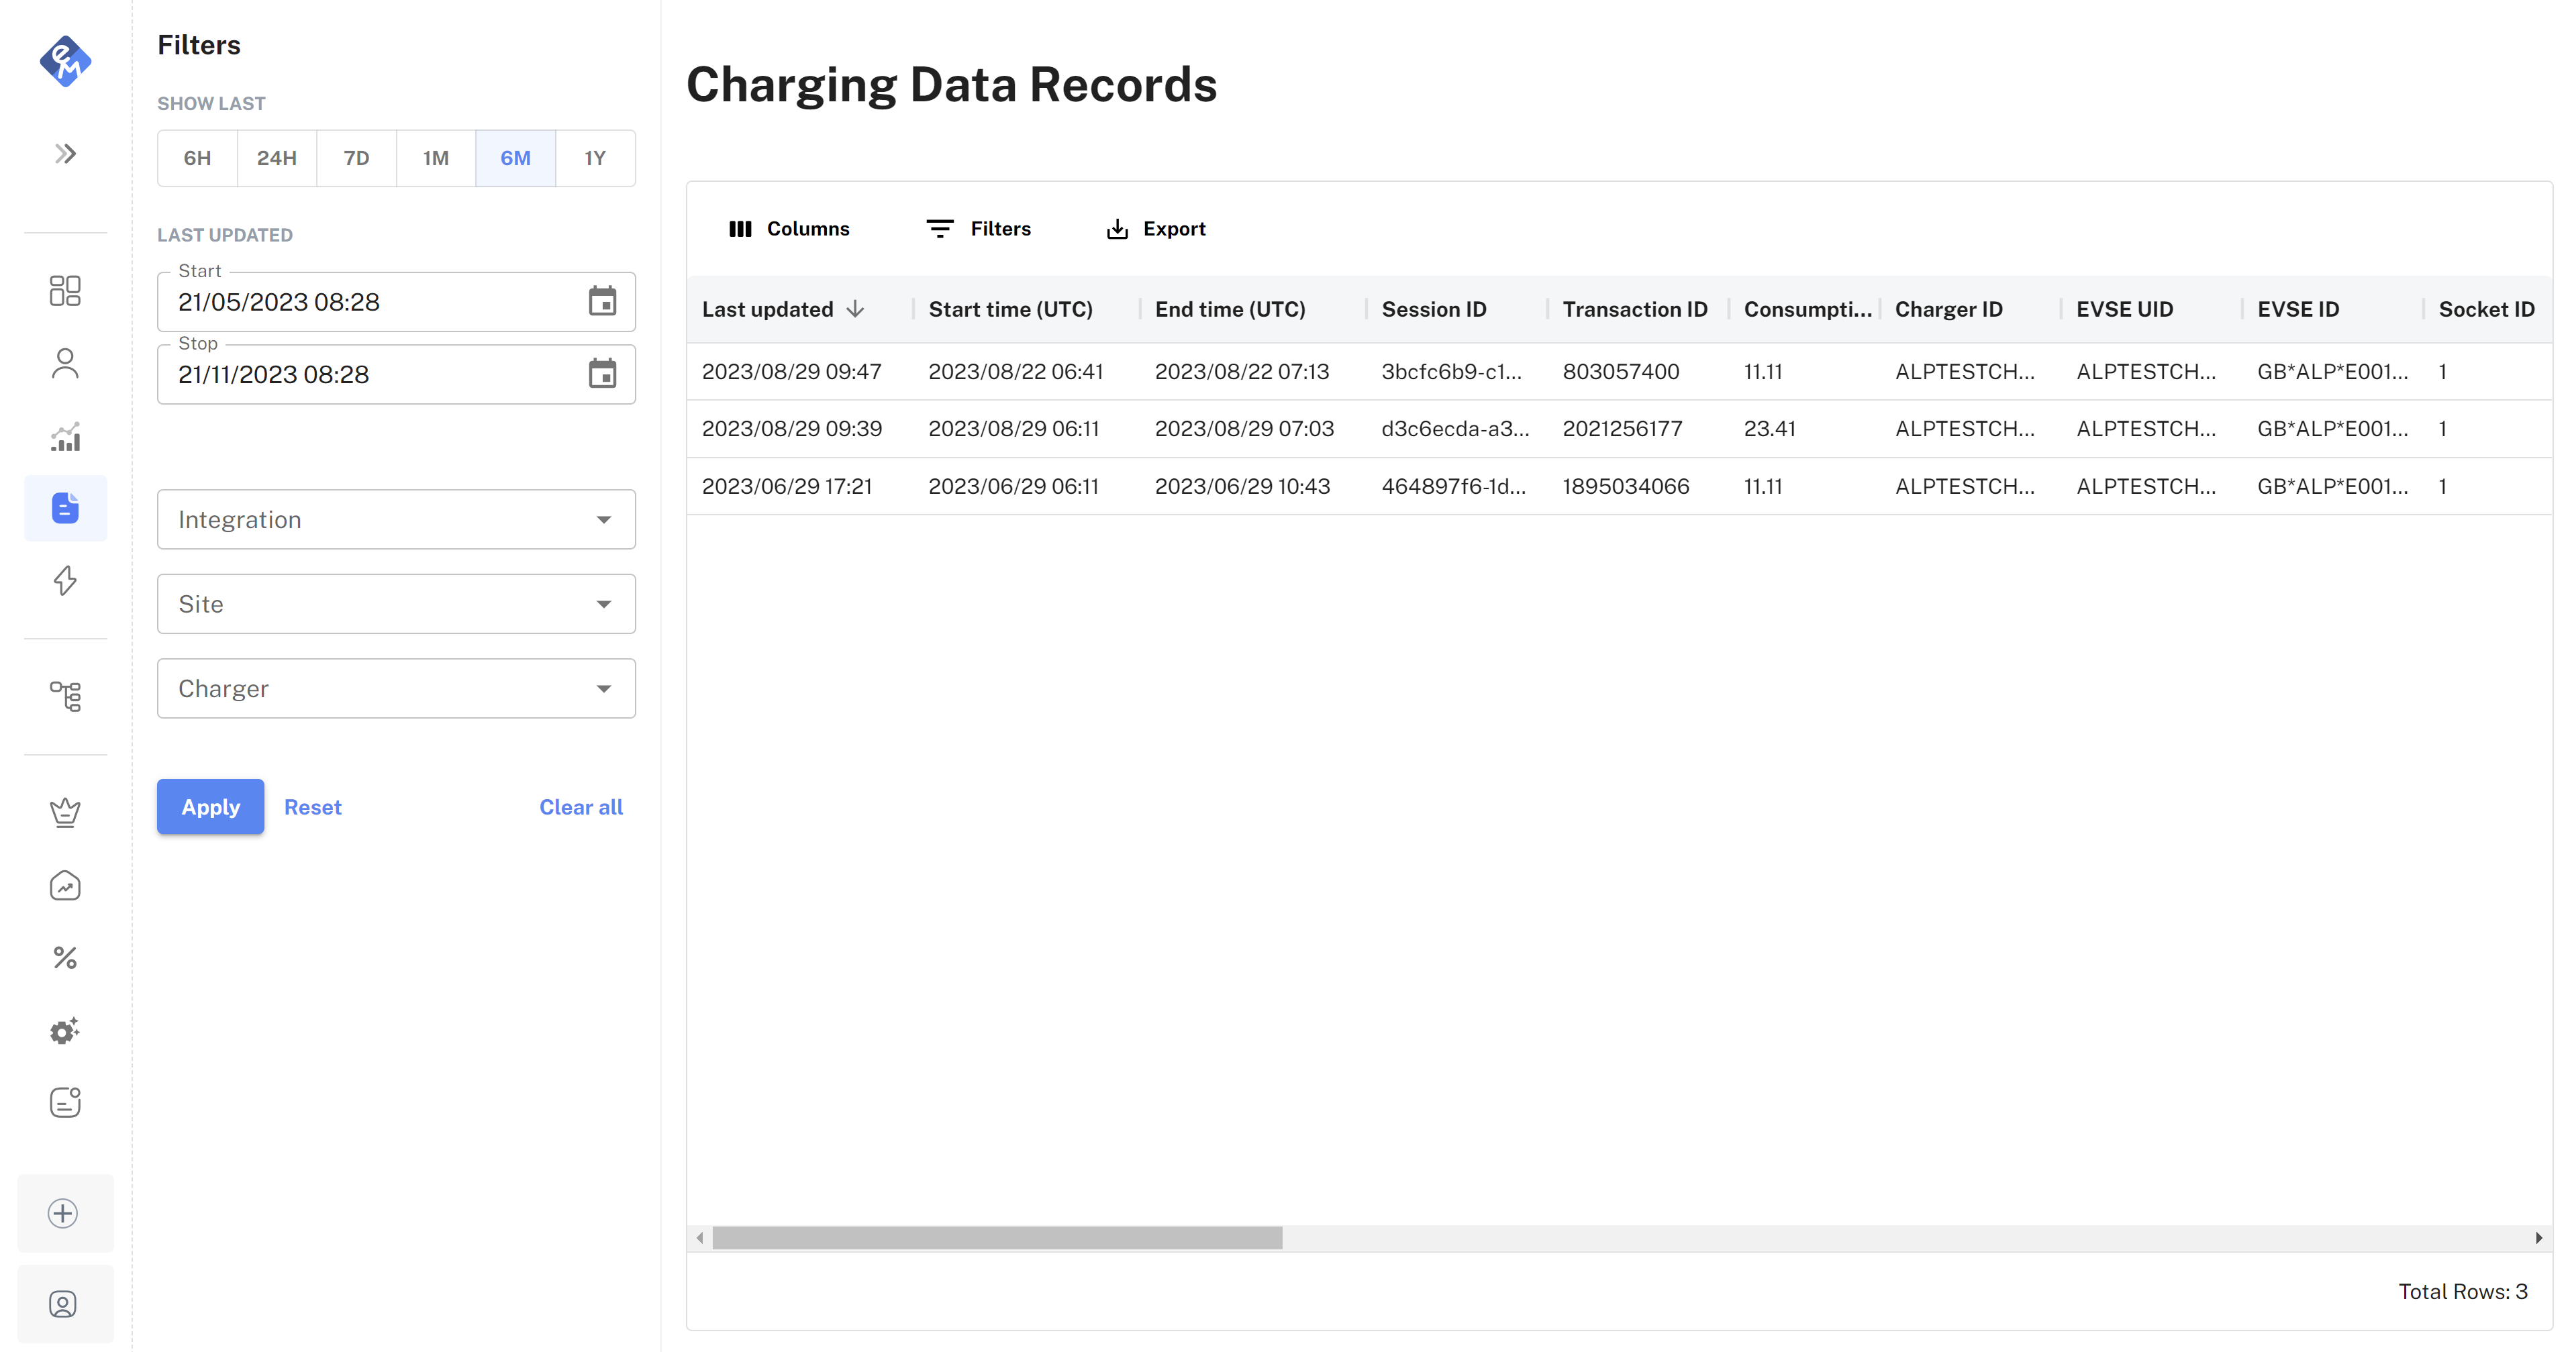 Charging Data Records page